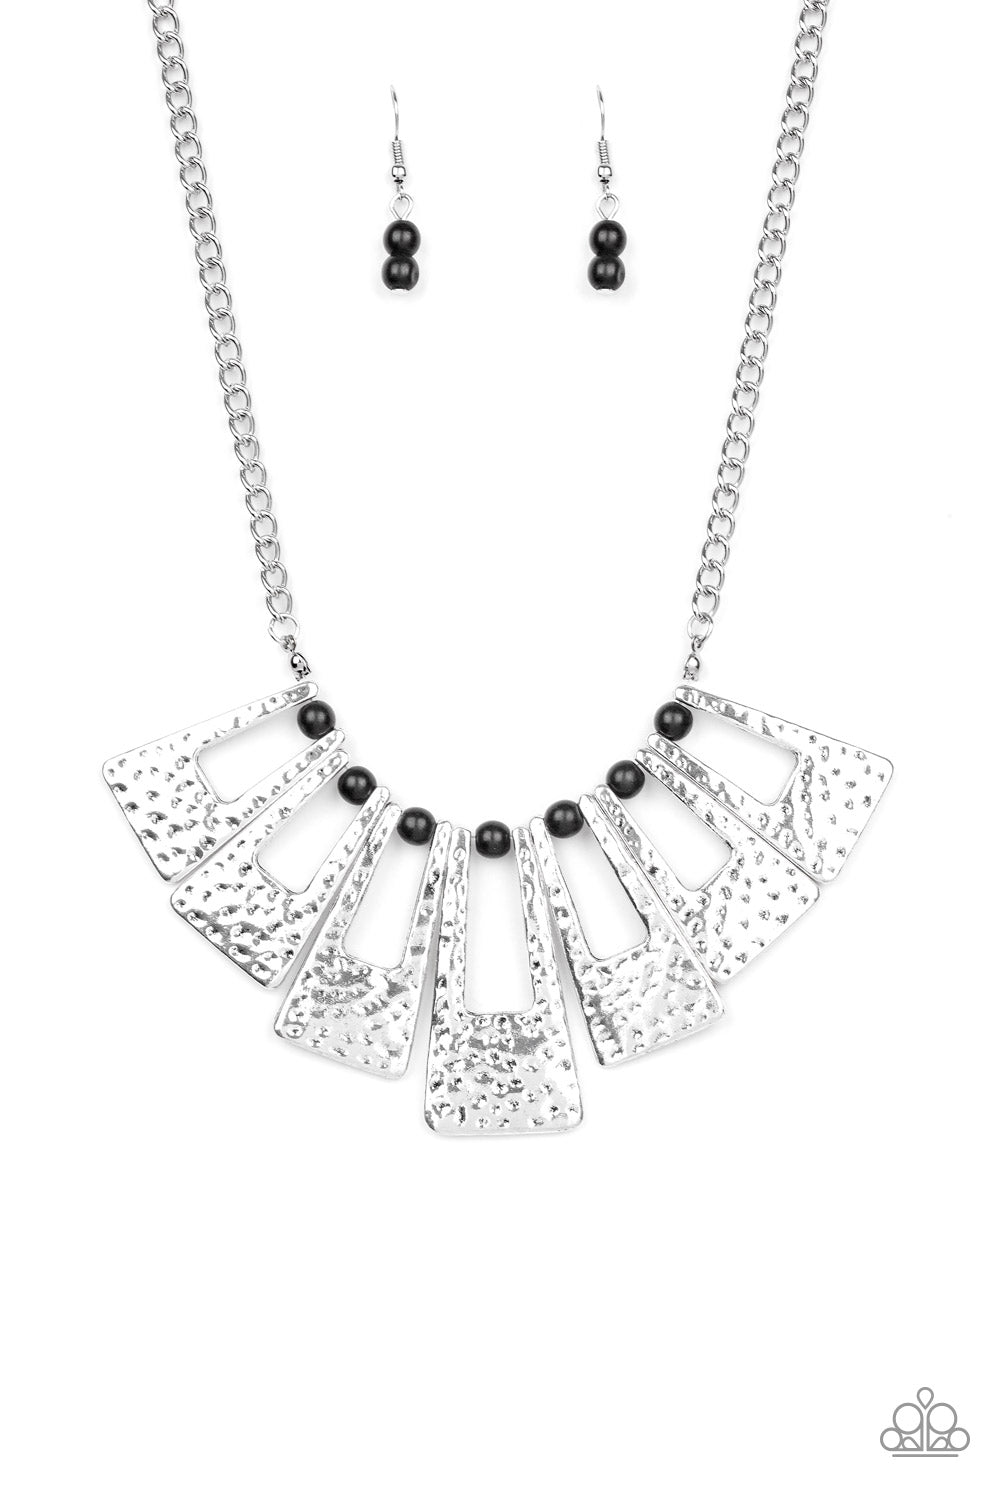 Paparazzi Accessories - Terra Takeover - Black Necklace - Alies Bling Bar